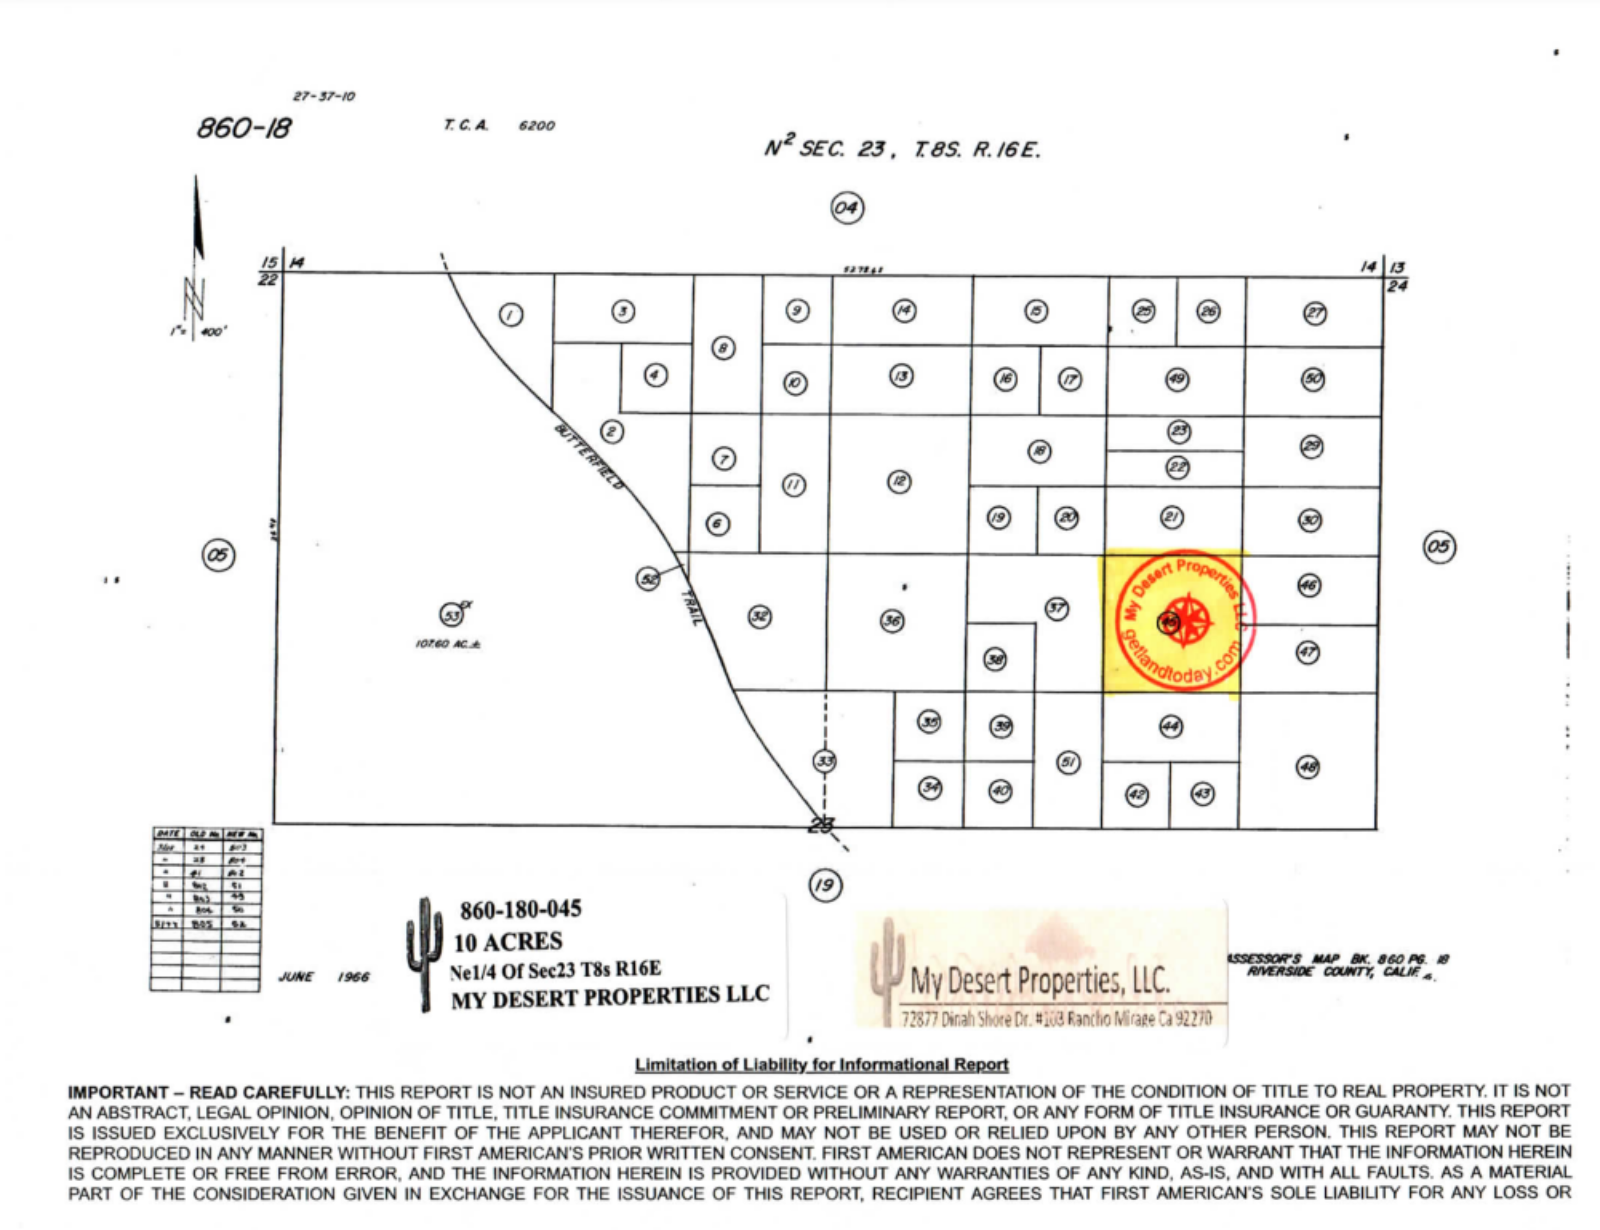 *NEW* RECREATIONAL 10 ACRES NEAR CHUCKWALLA MOUNTAINS!! LOW MONTHLY PAYMENTS OF $175.00 APN: 860-180-045 - Get Land Today